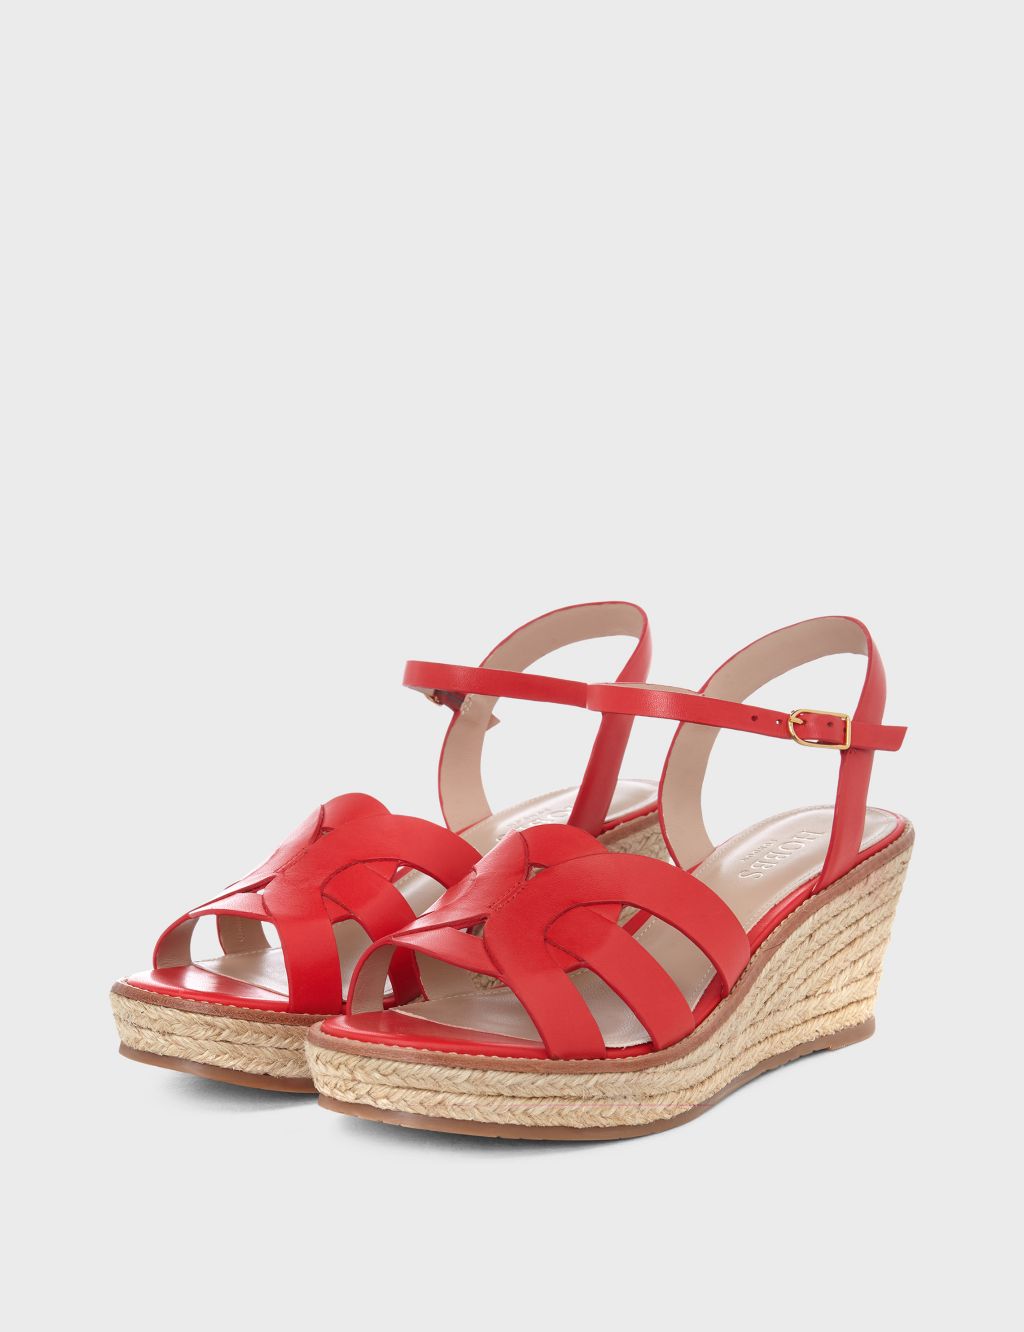 Leather Ankle Strap Wedge Espadrilles image 2